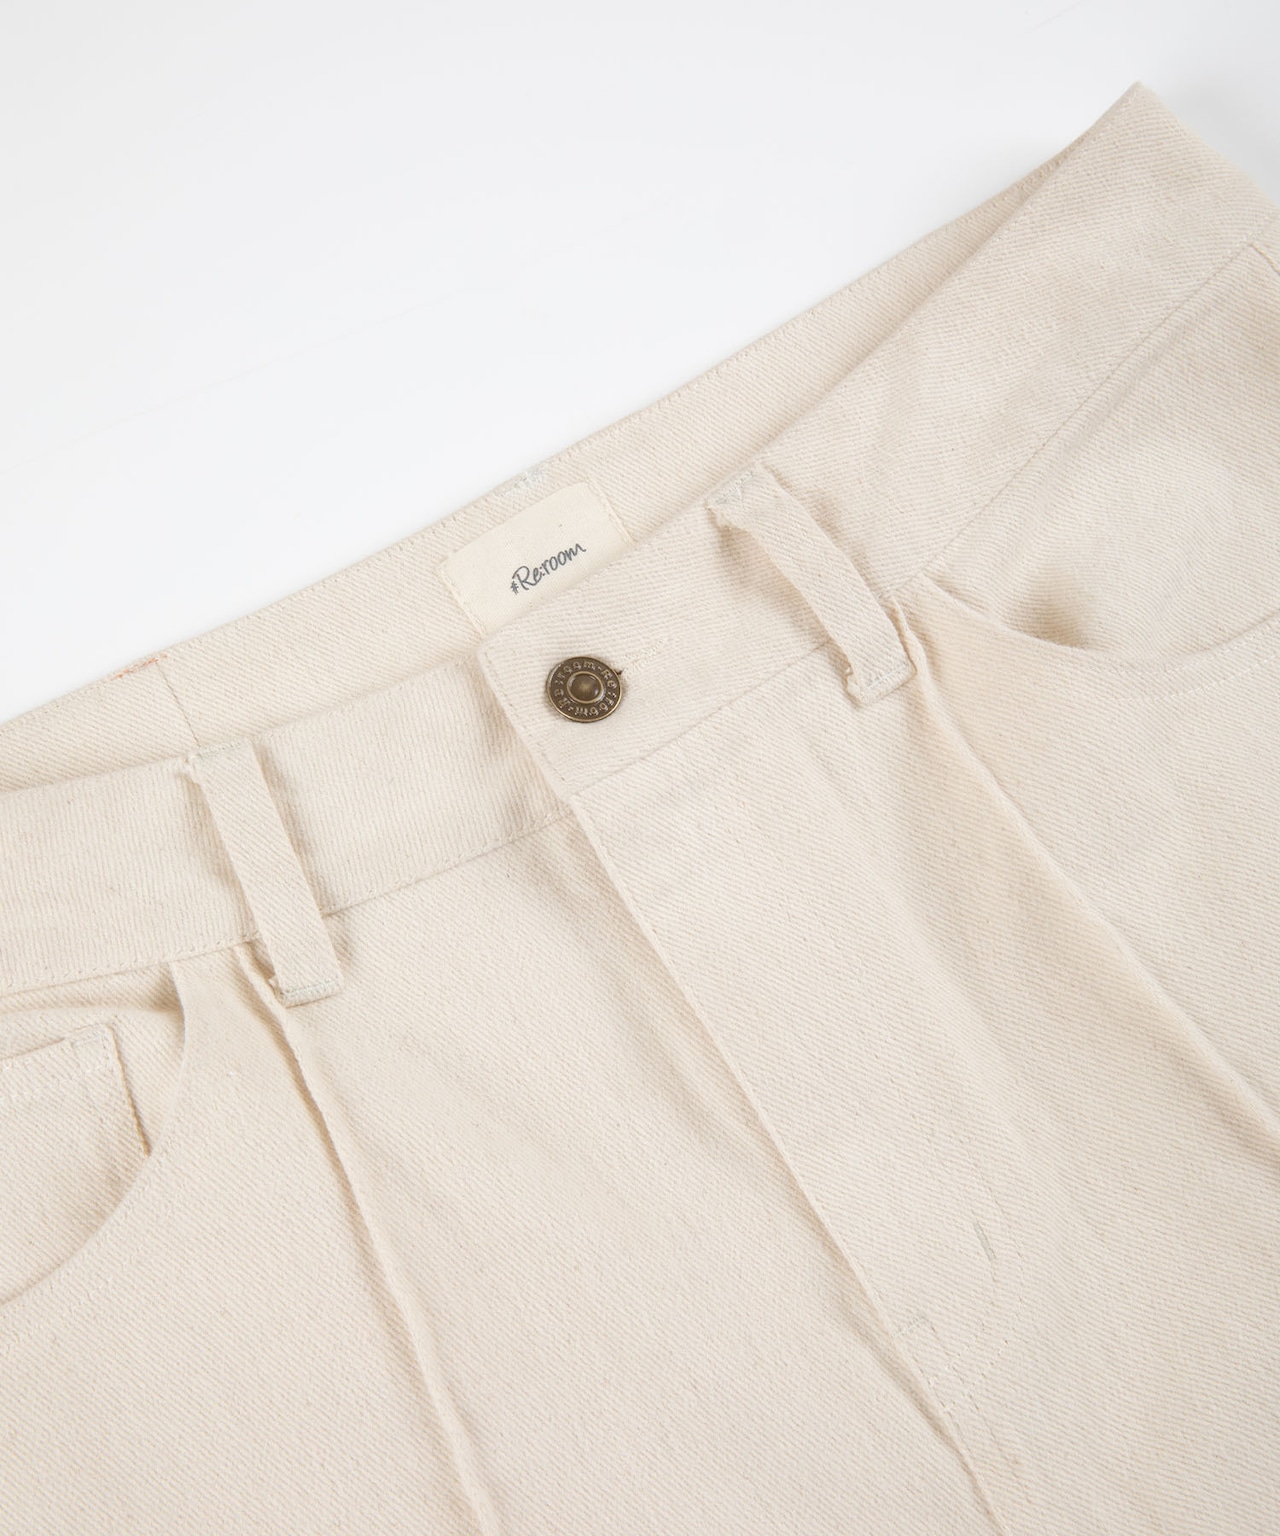 【#Re:room】COTTON TWILL HEM BUTTON TRACK PANTS［REP202］